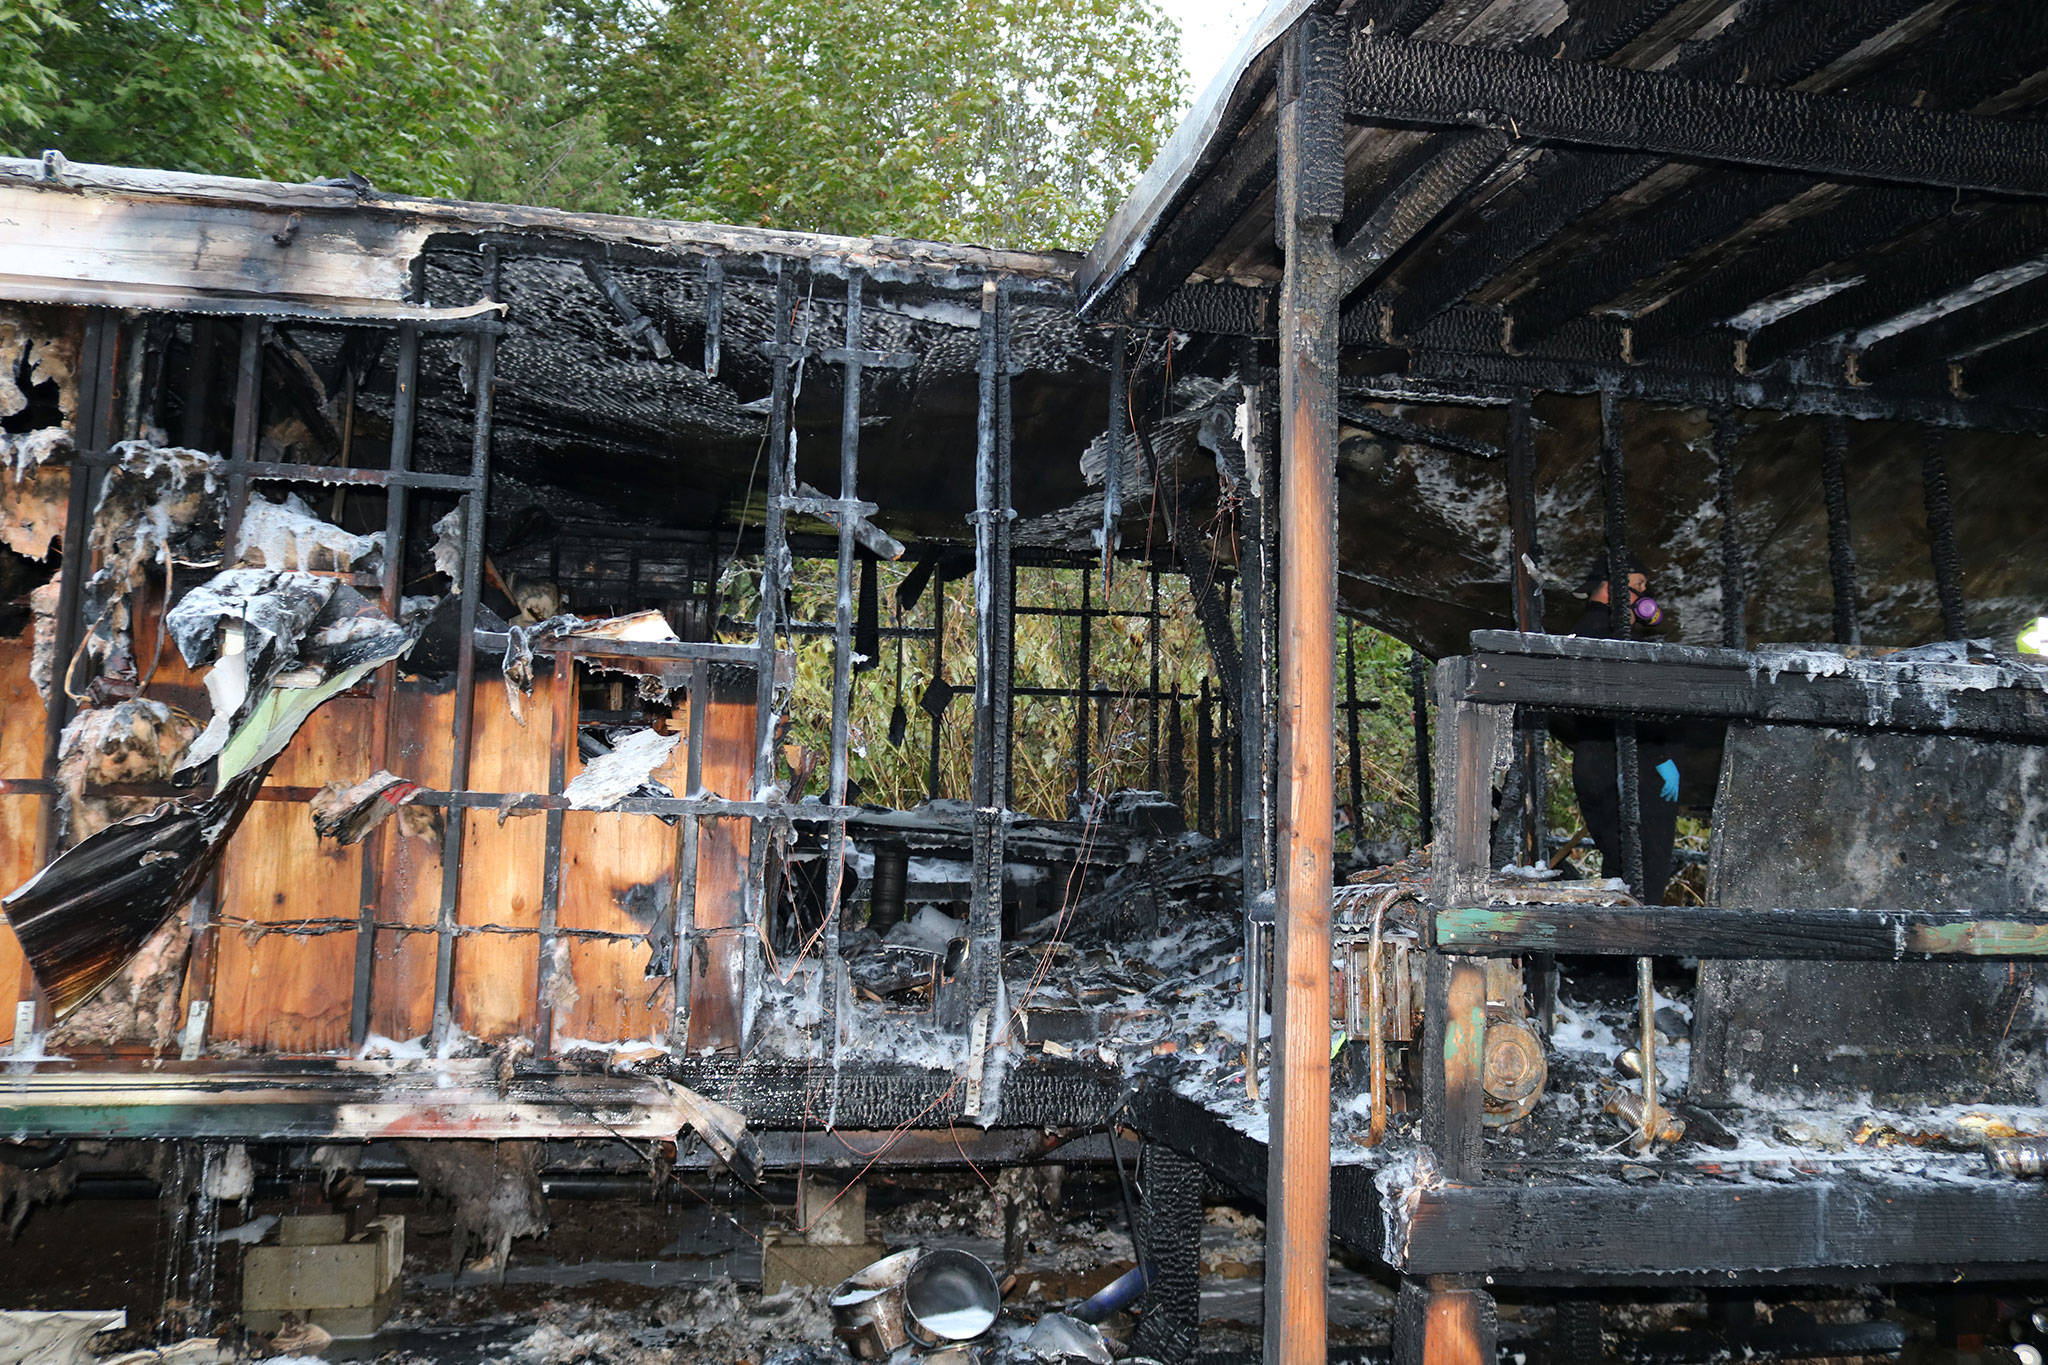 No alarms or escape plan but Marysville family OK after mobile home fire